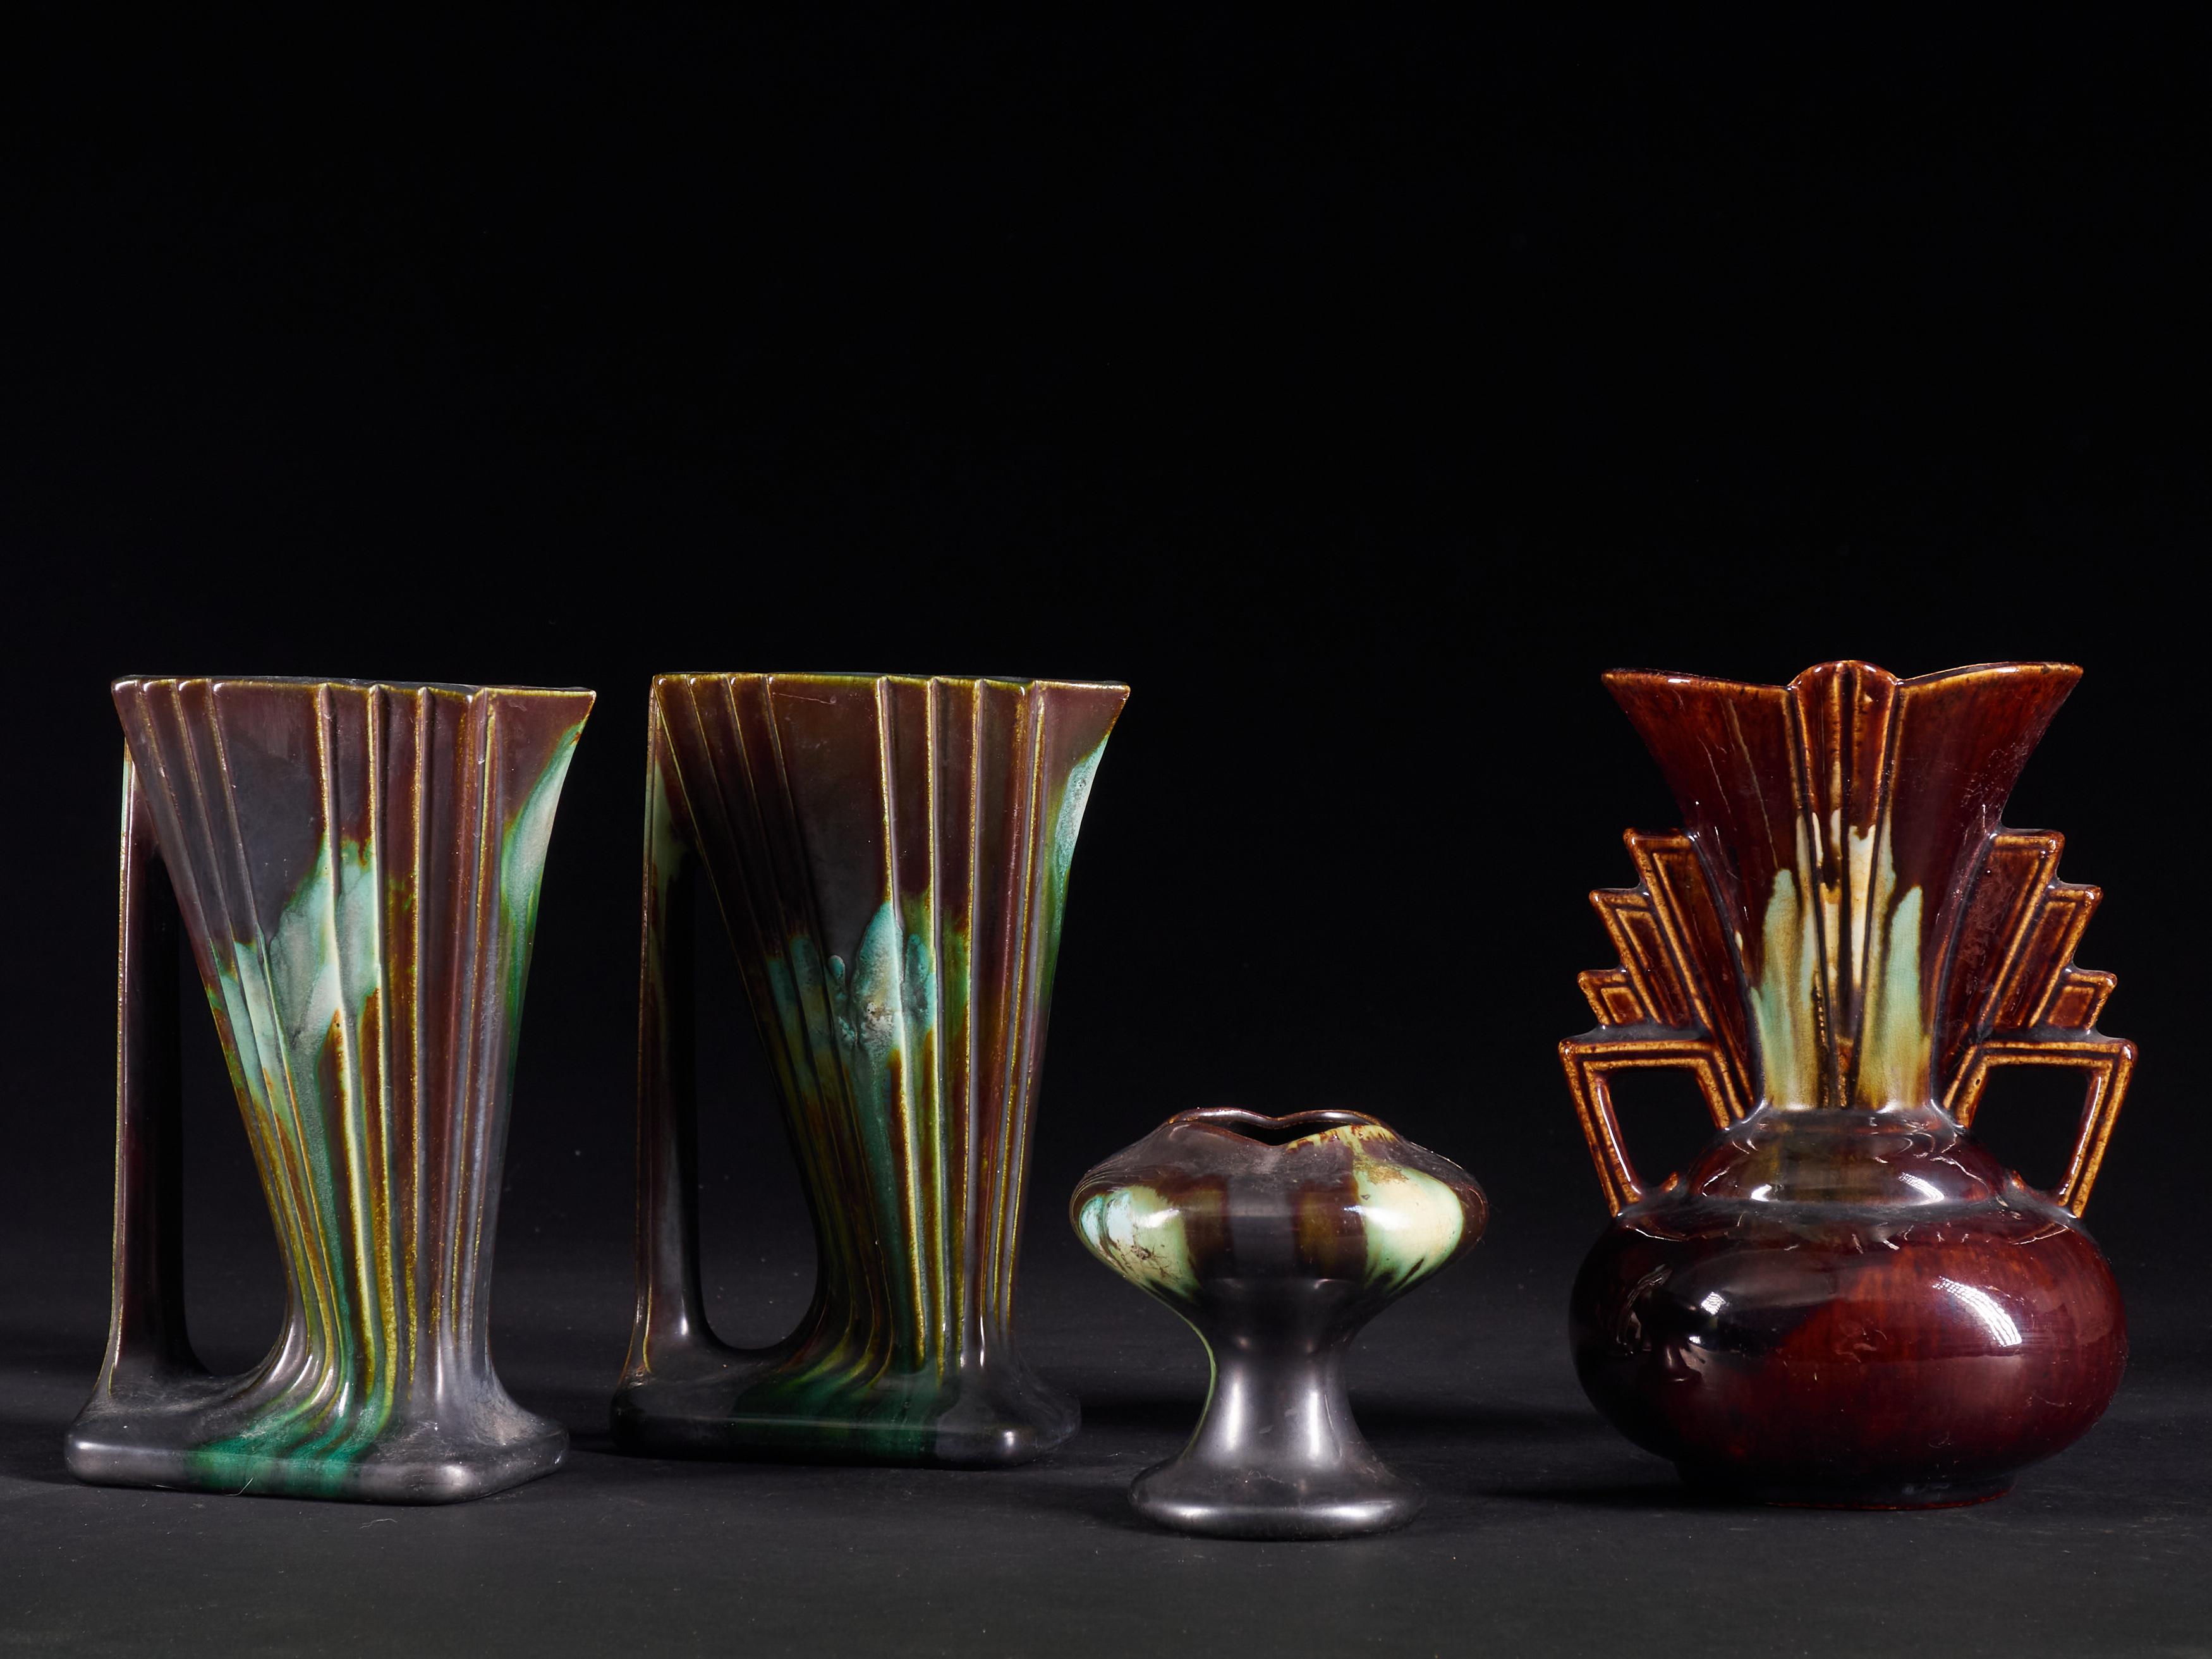 Very original set of Belgian drip faiencerie Art Deco vases with ribbed relief and an orange-brown & turquoise glaze. One item is slightly chipped on the bottom and another has hairline cracks, the other 2 are in excellent condition. Tags on the